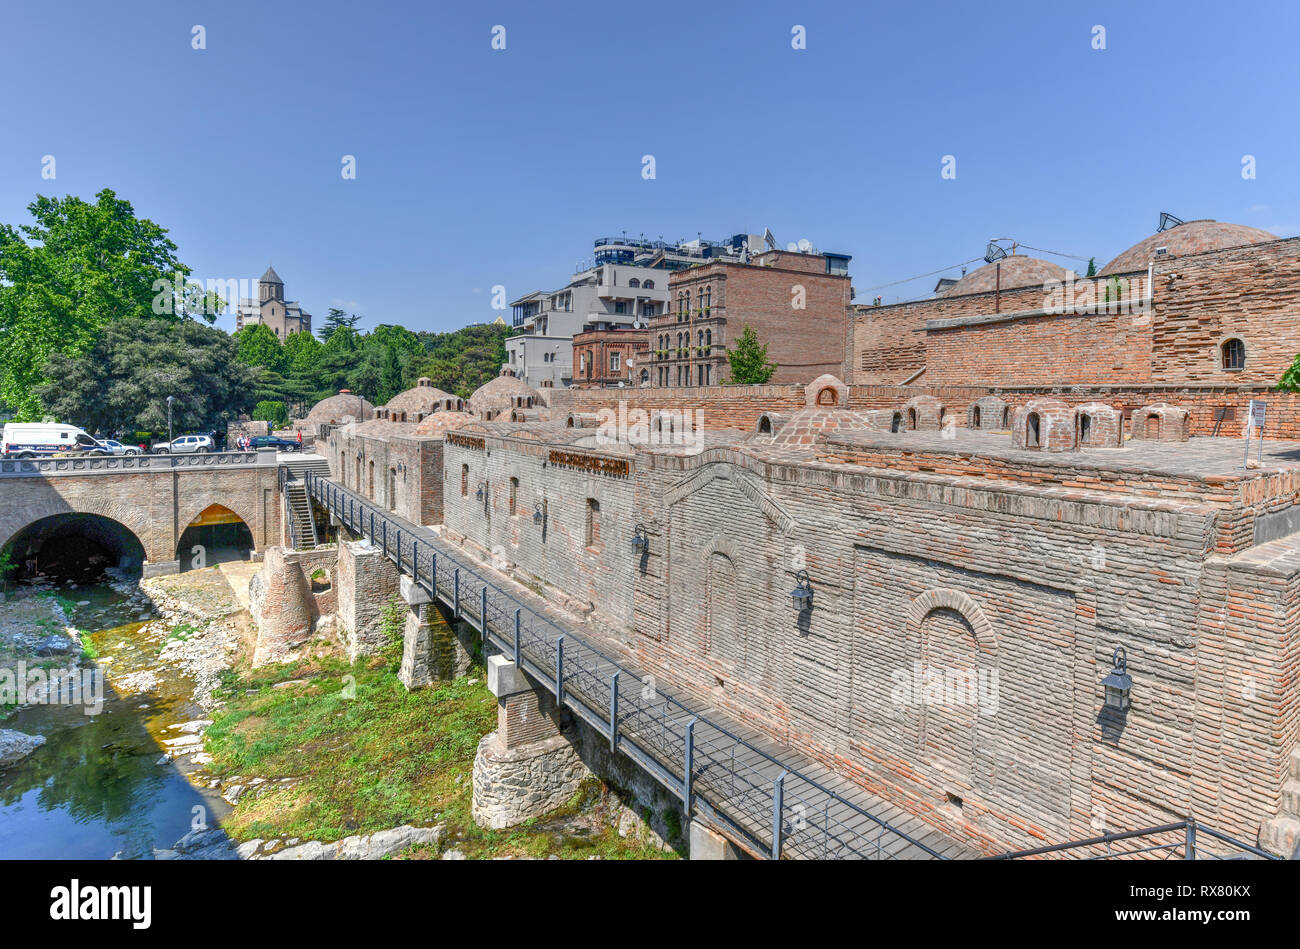 Tbilisi, Georgia - July 10, 2018: Famous sulphur baths with Orbeliani islamic mosque, traditional Tiflis architecture, carved wooden balconies at Aban Stock Photo